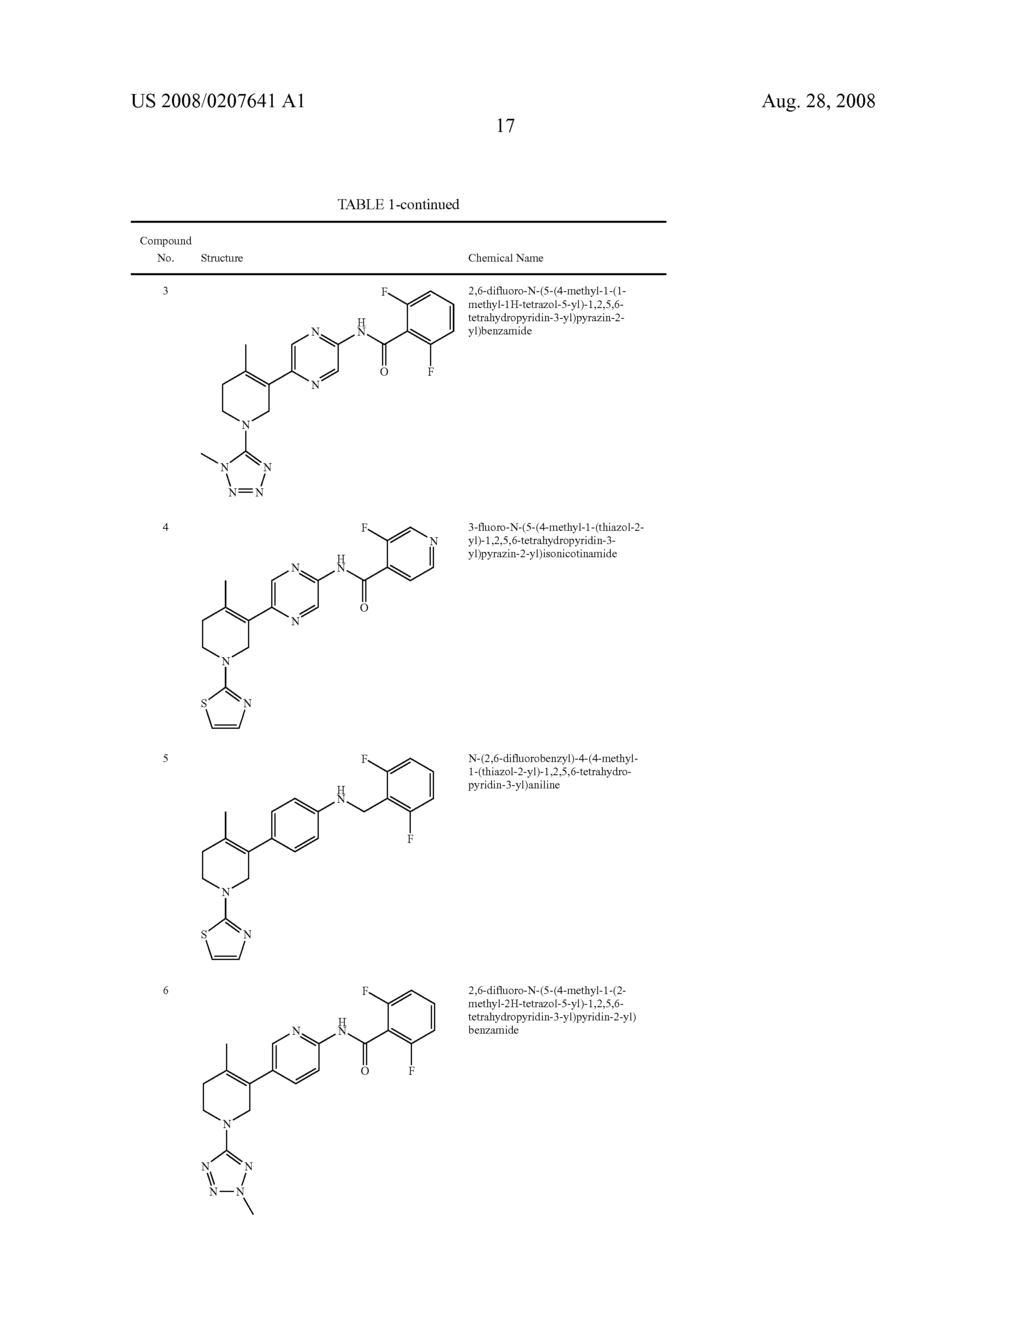 CYCLOHEXENYL-ARYL COMPOUNDS FOR INFLAMMATION AND IMMUNE-RELATED USES - diagram, schematic, and image 18